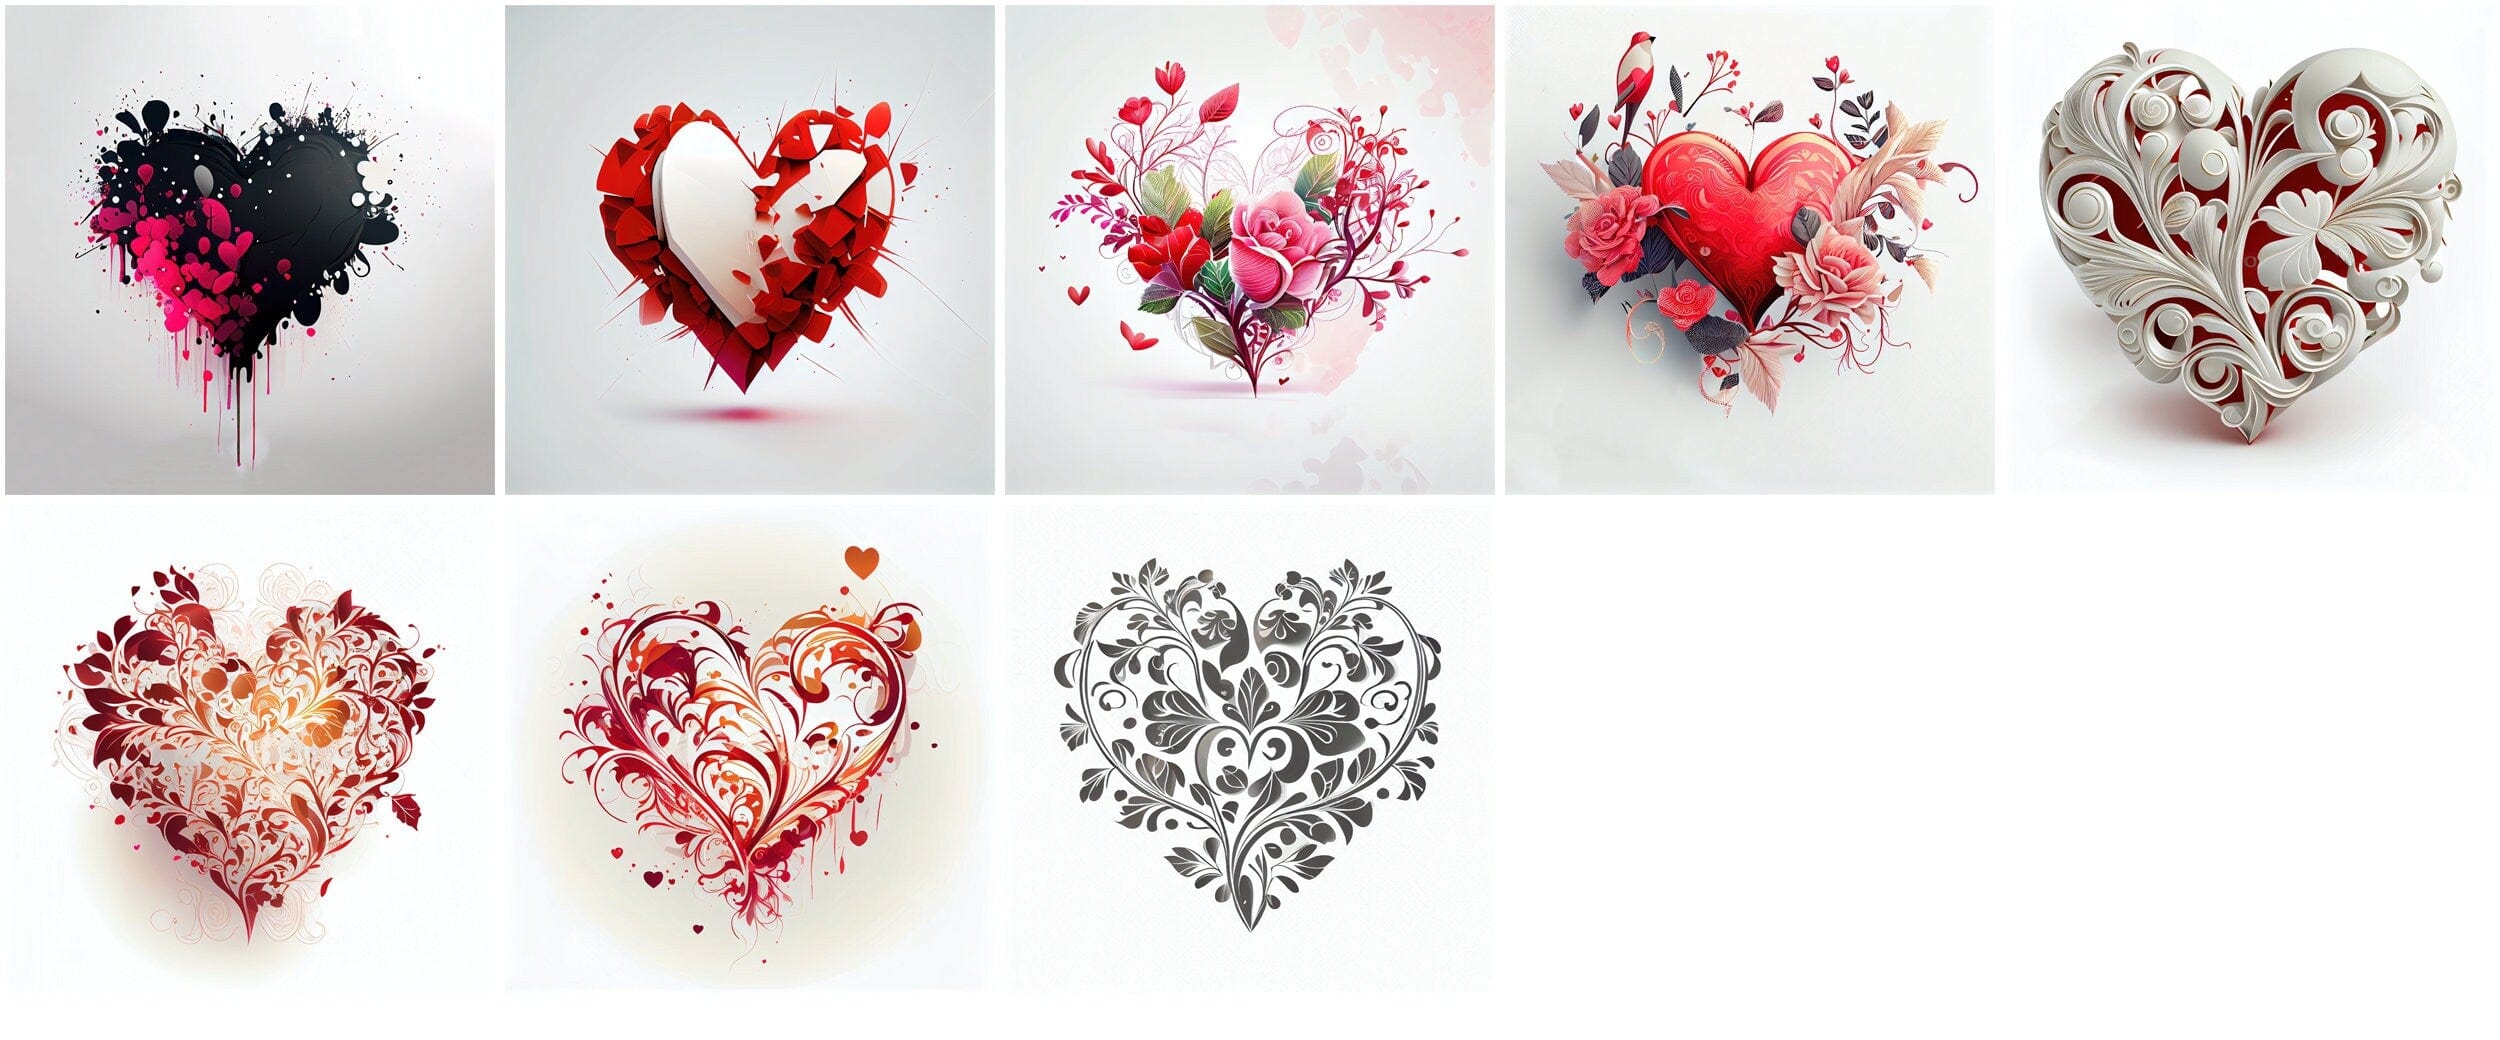 Valentine's Day Hearts, Hearts Love Clip Art - Heart to Heart: 180 Ways to Show Your Love this Valentine's Day - Commercial License Digital Download Sumobundle